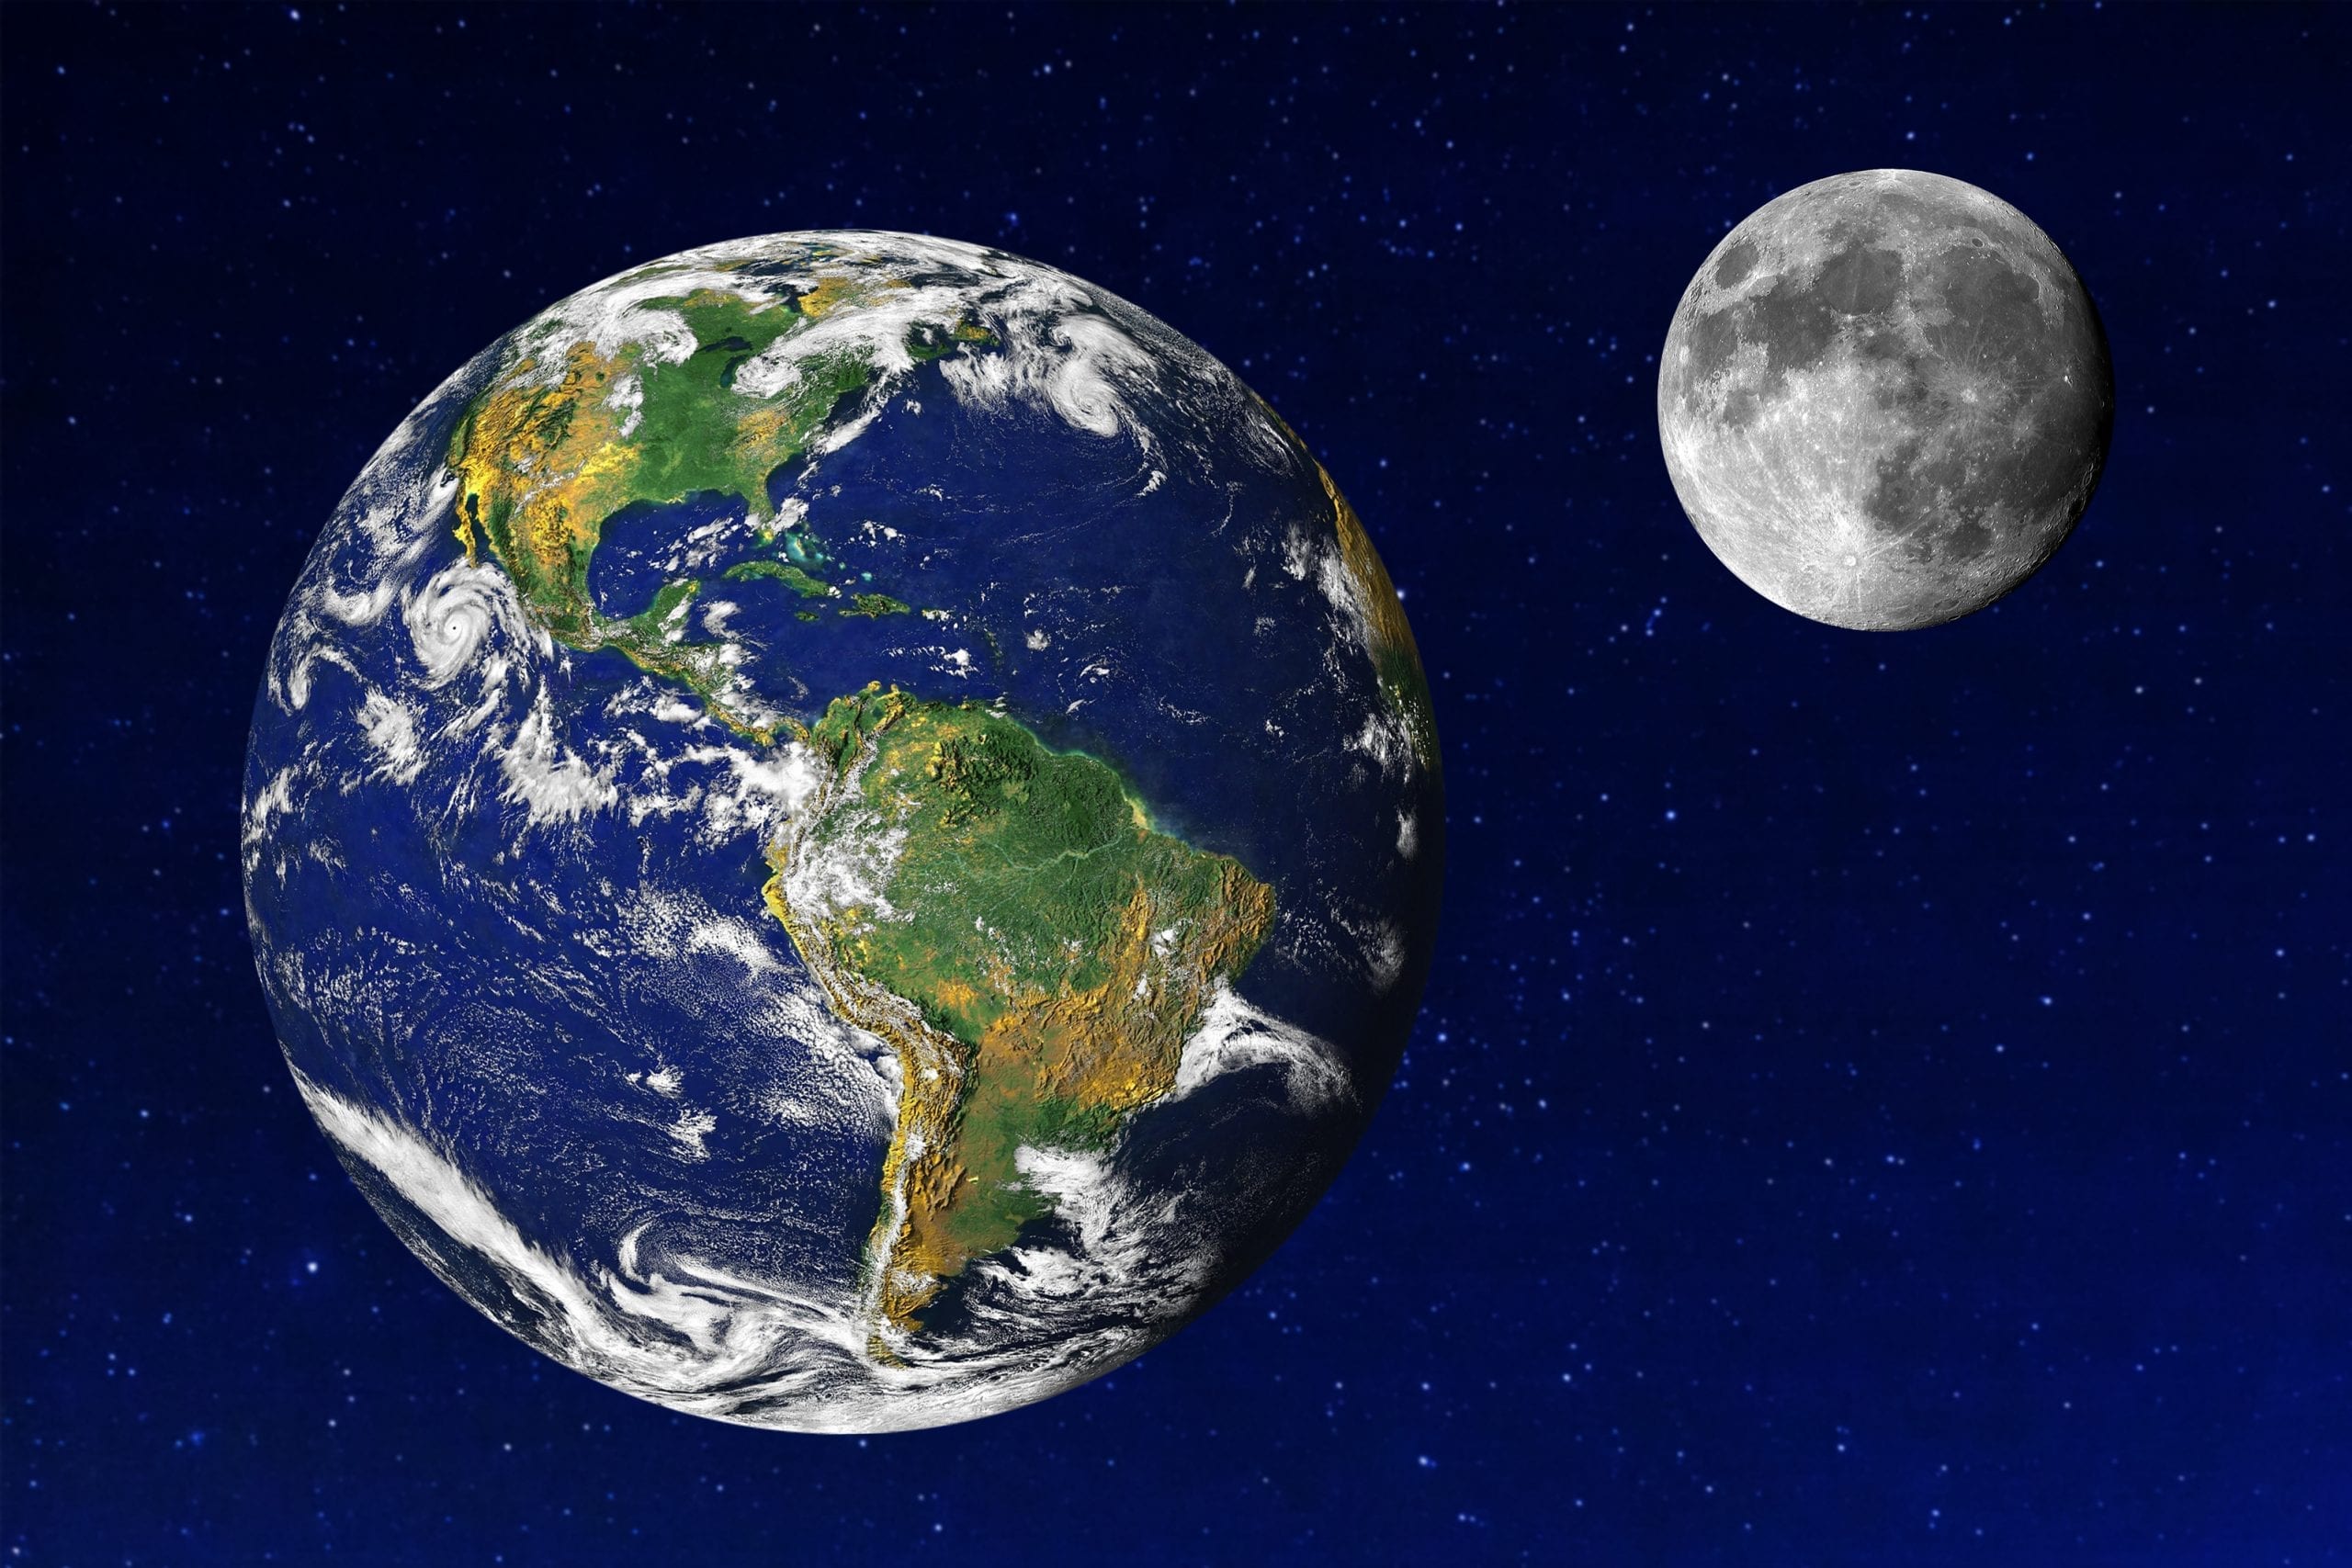 Earth and Moon in the universe. Earth and Moon images provided by NASA